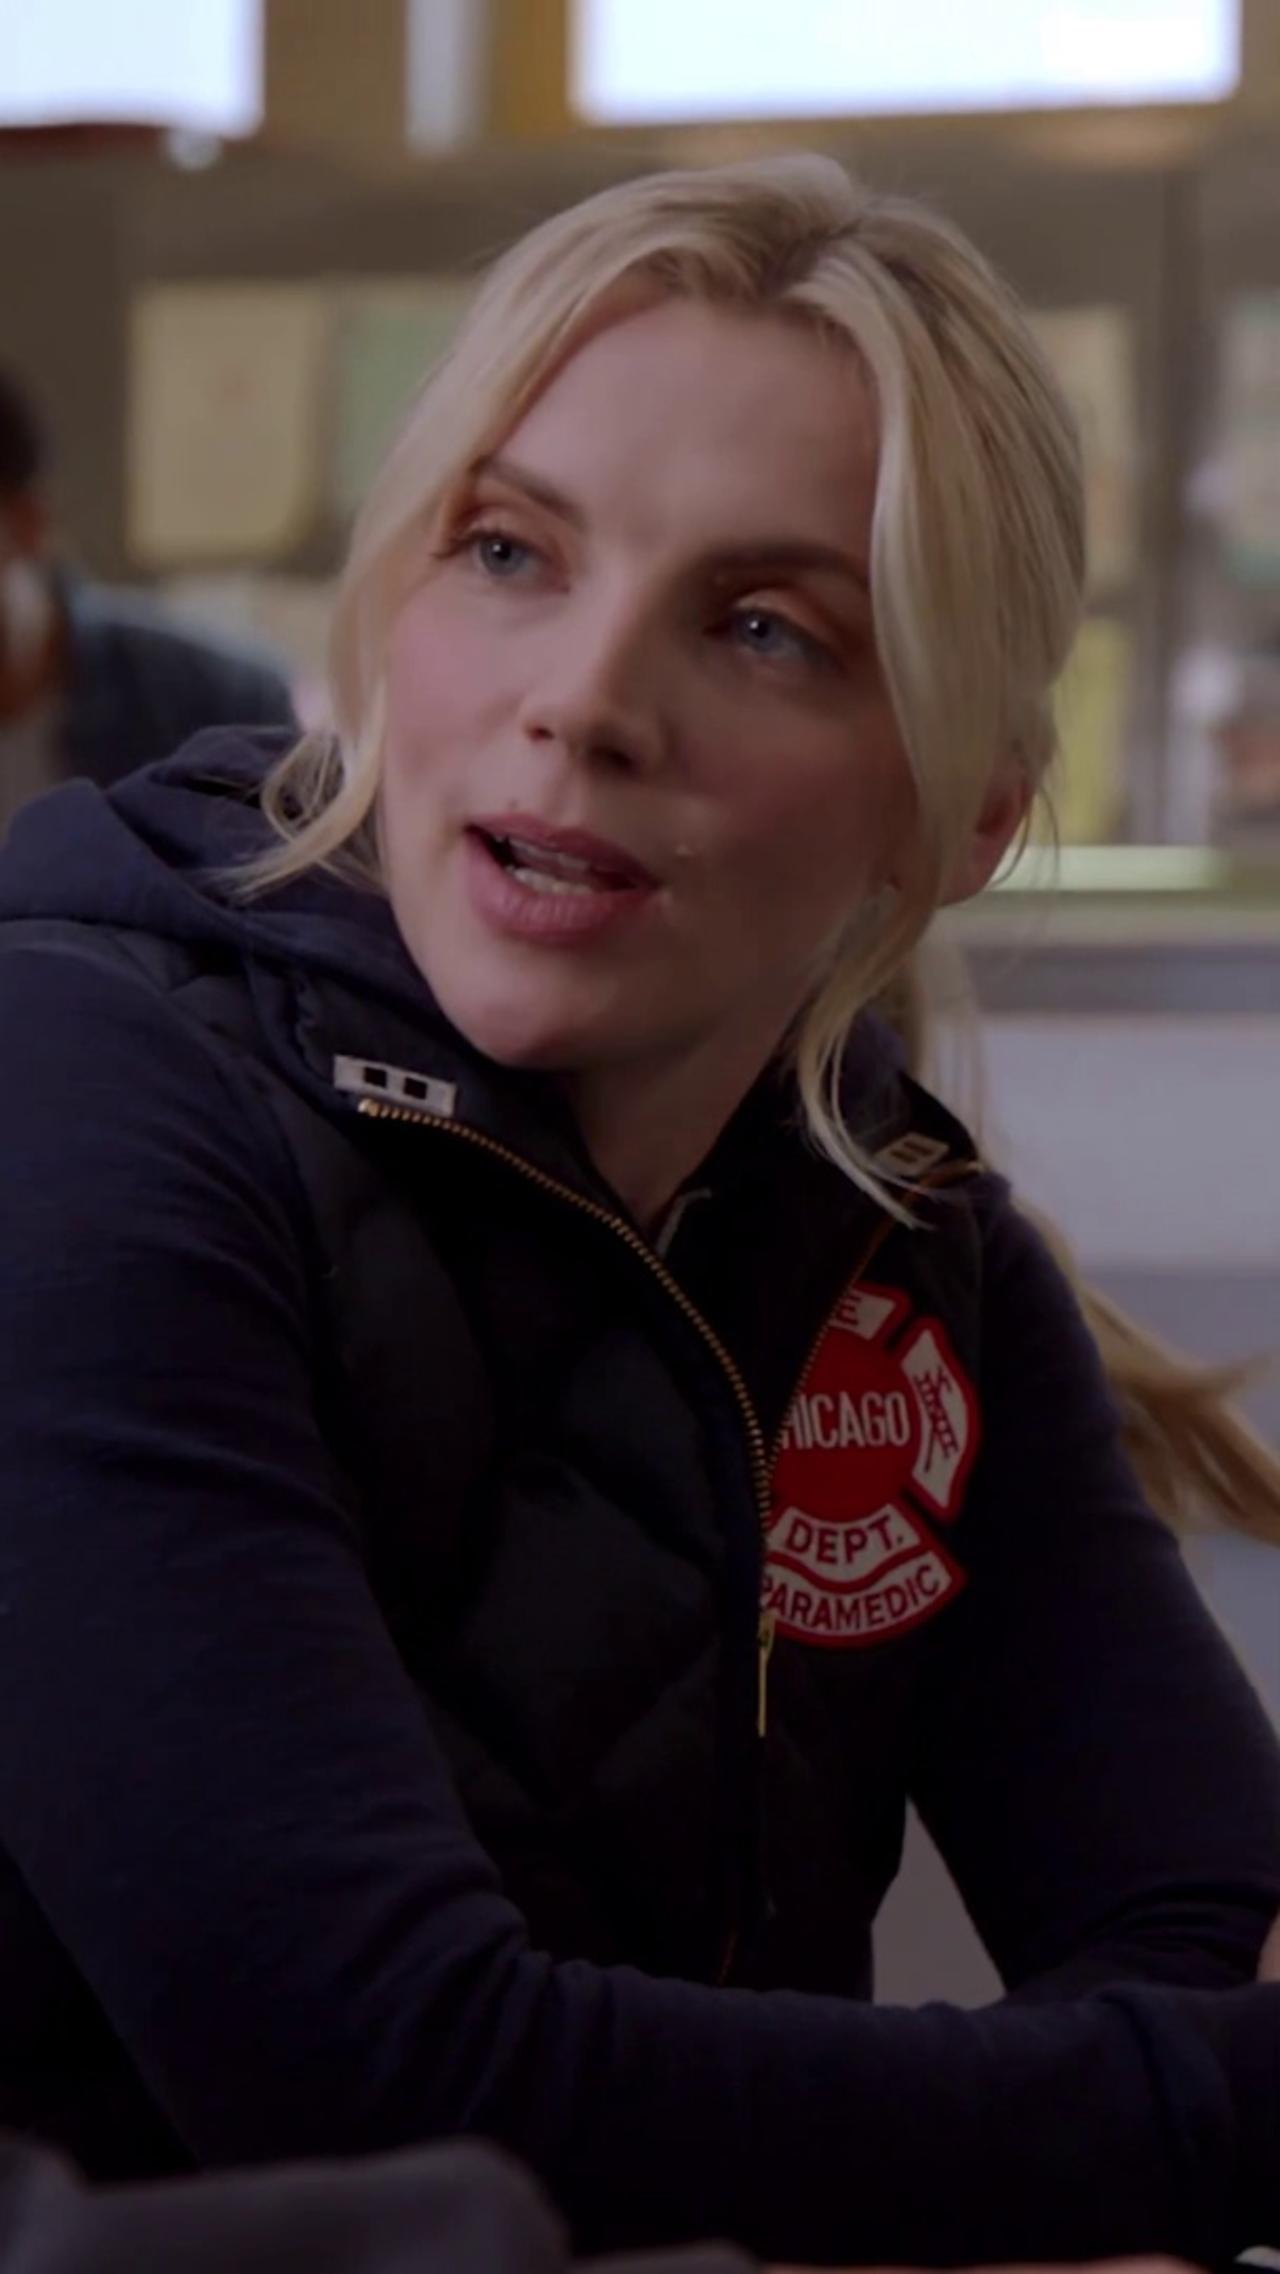 Leaving too Soon on NBC’s Chicago Fire